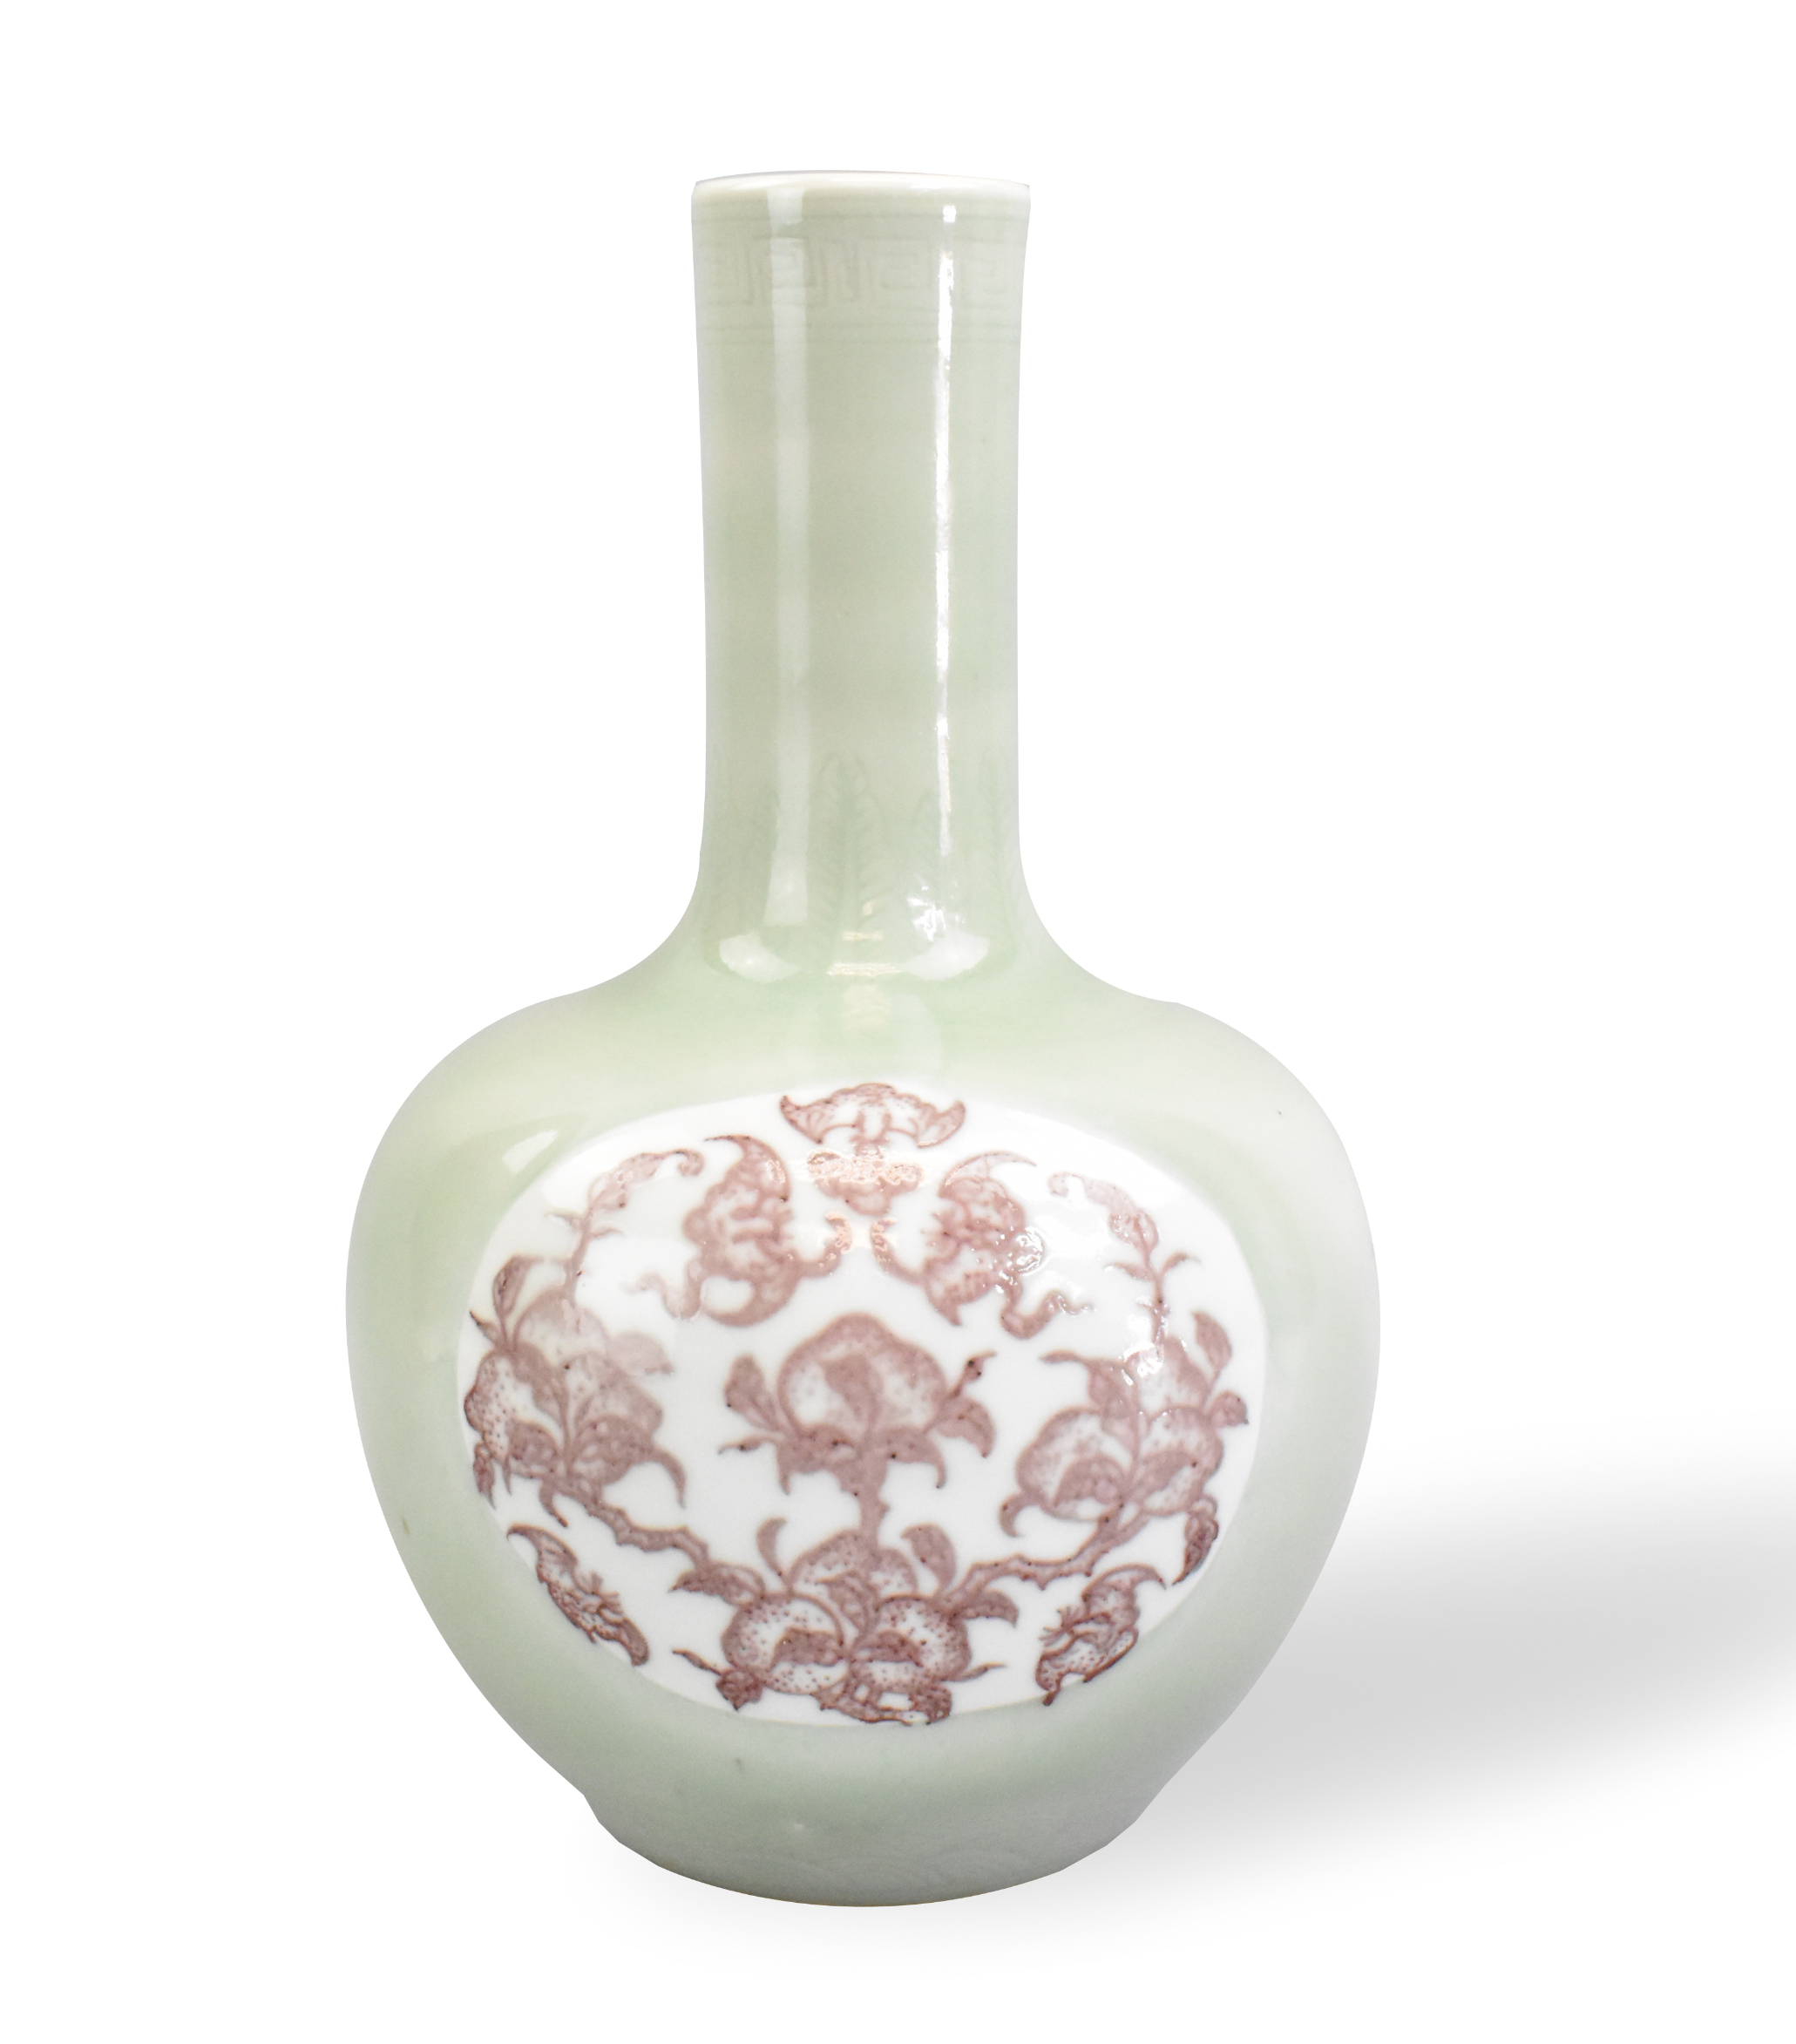 CHINESE CELADON GLAZED COPPER RED 3017f8